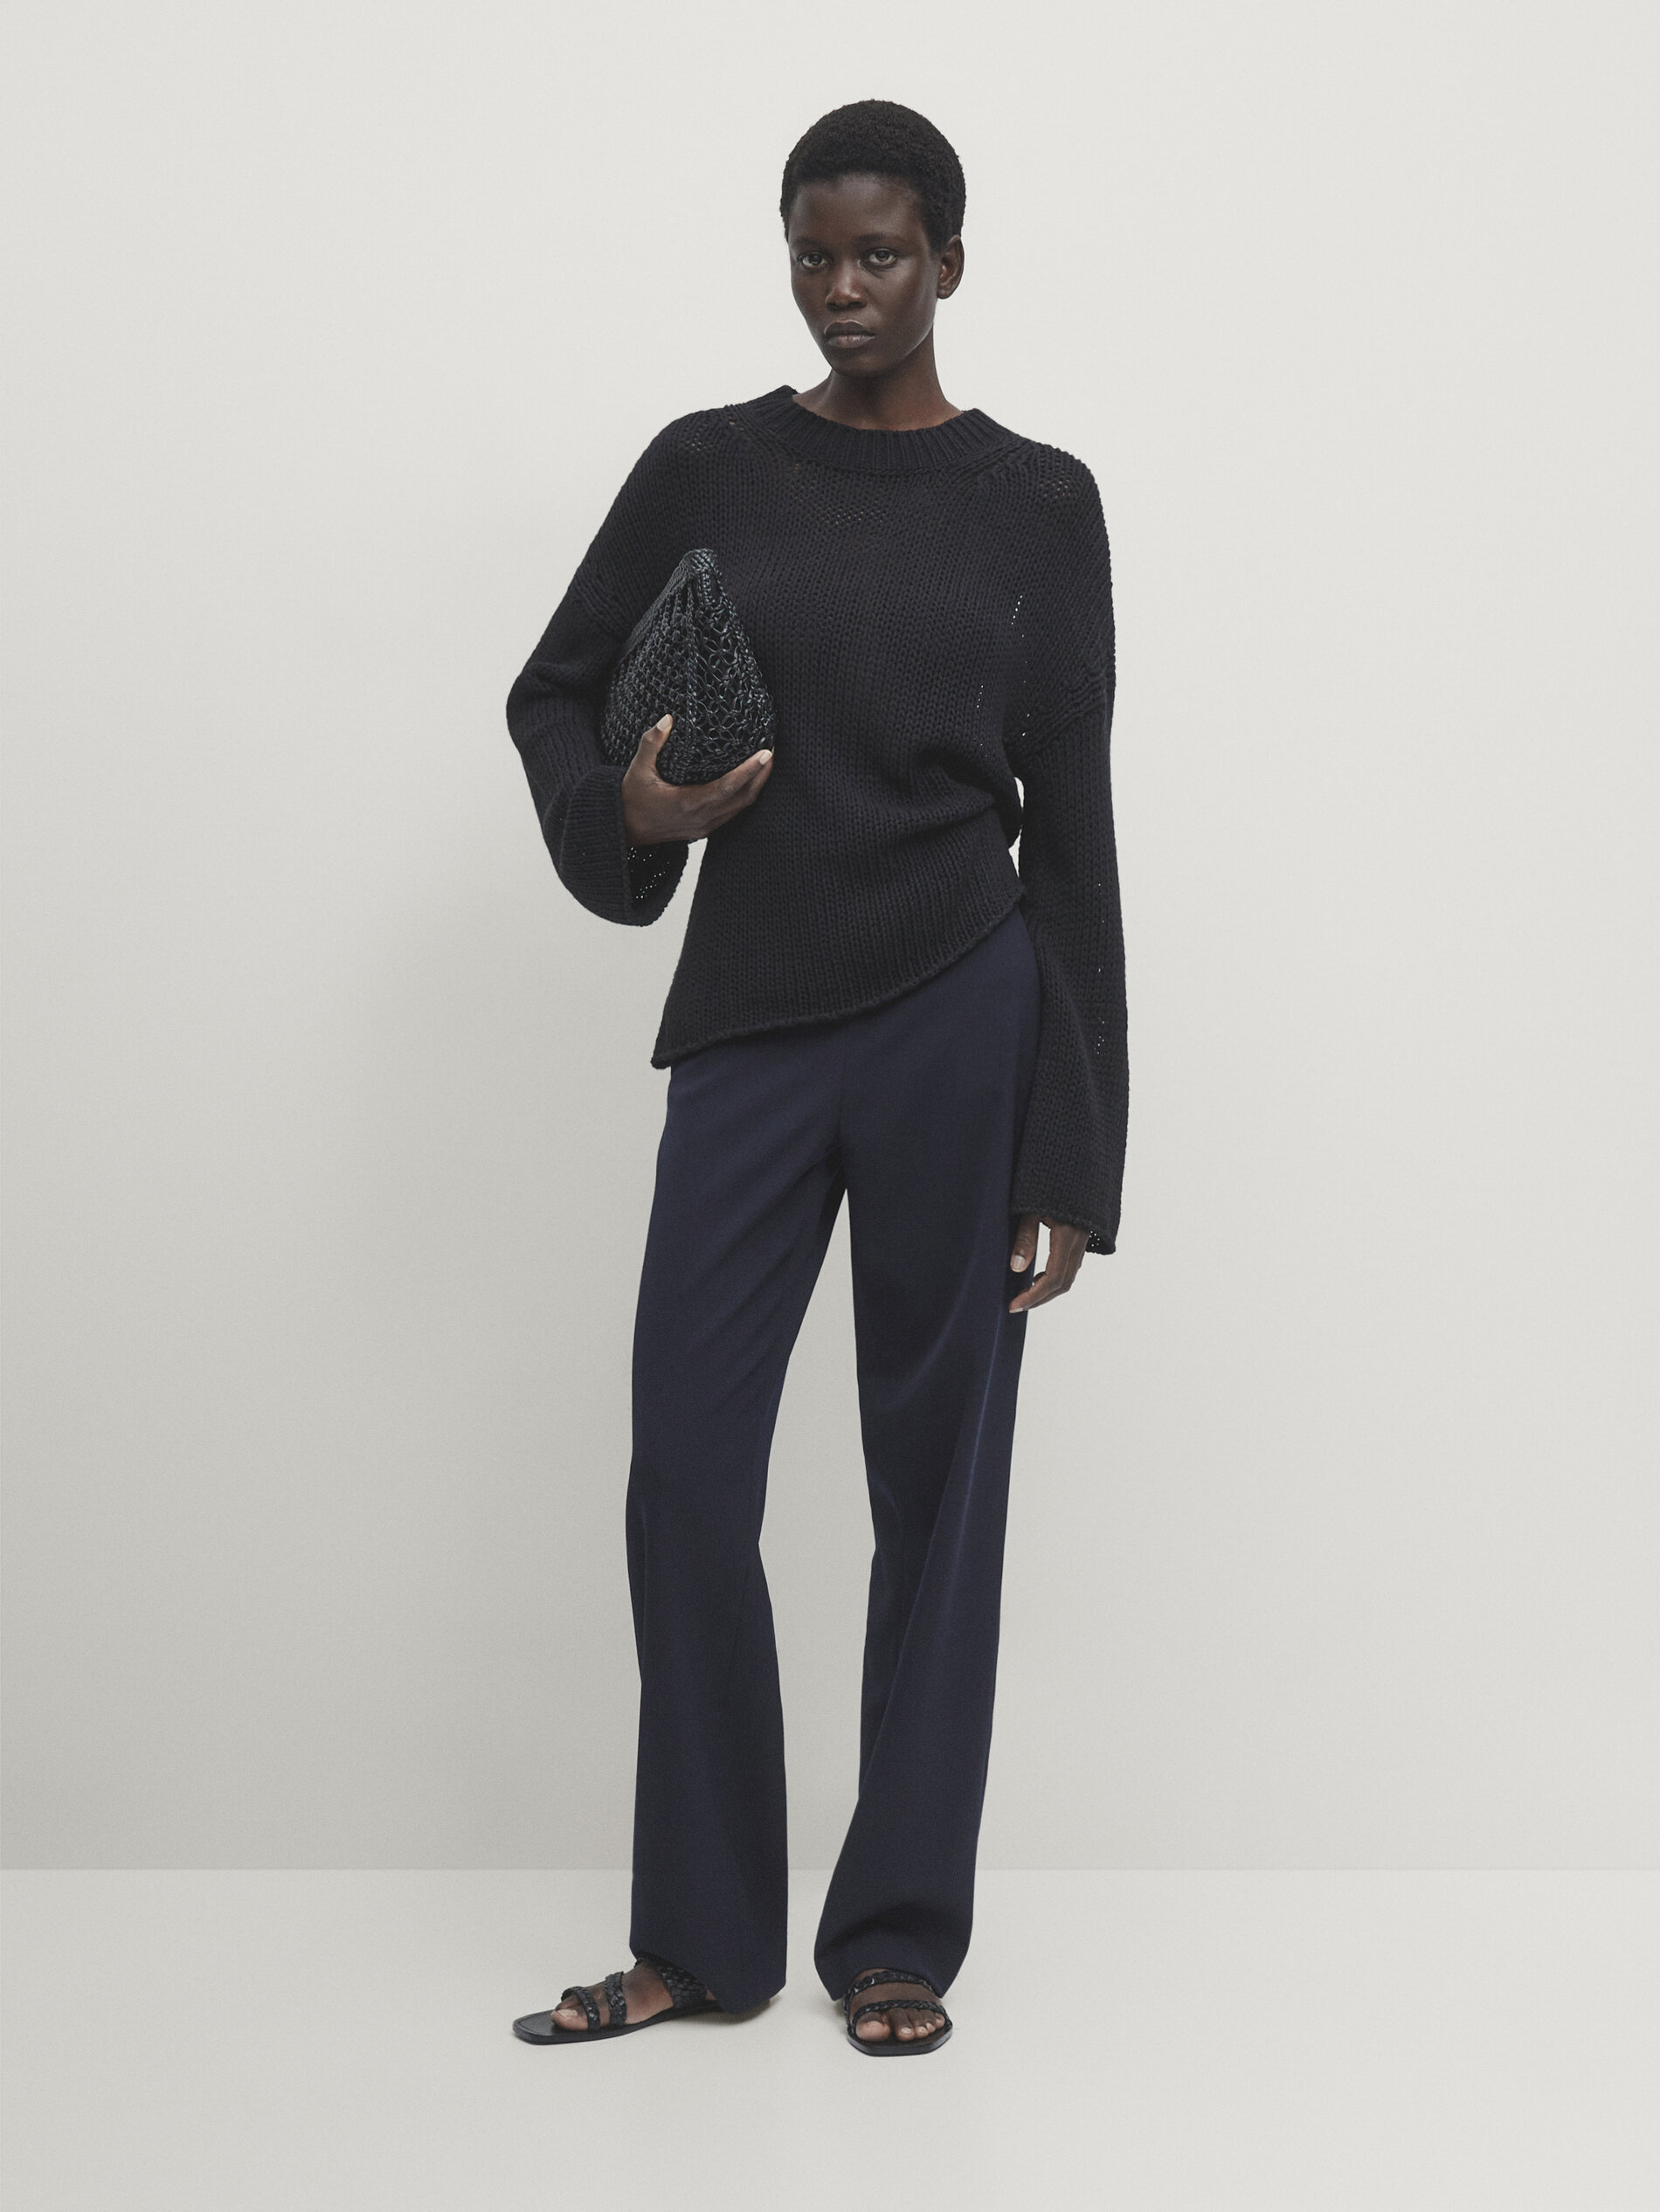 Straight-fit plain navy blue trousers